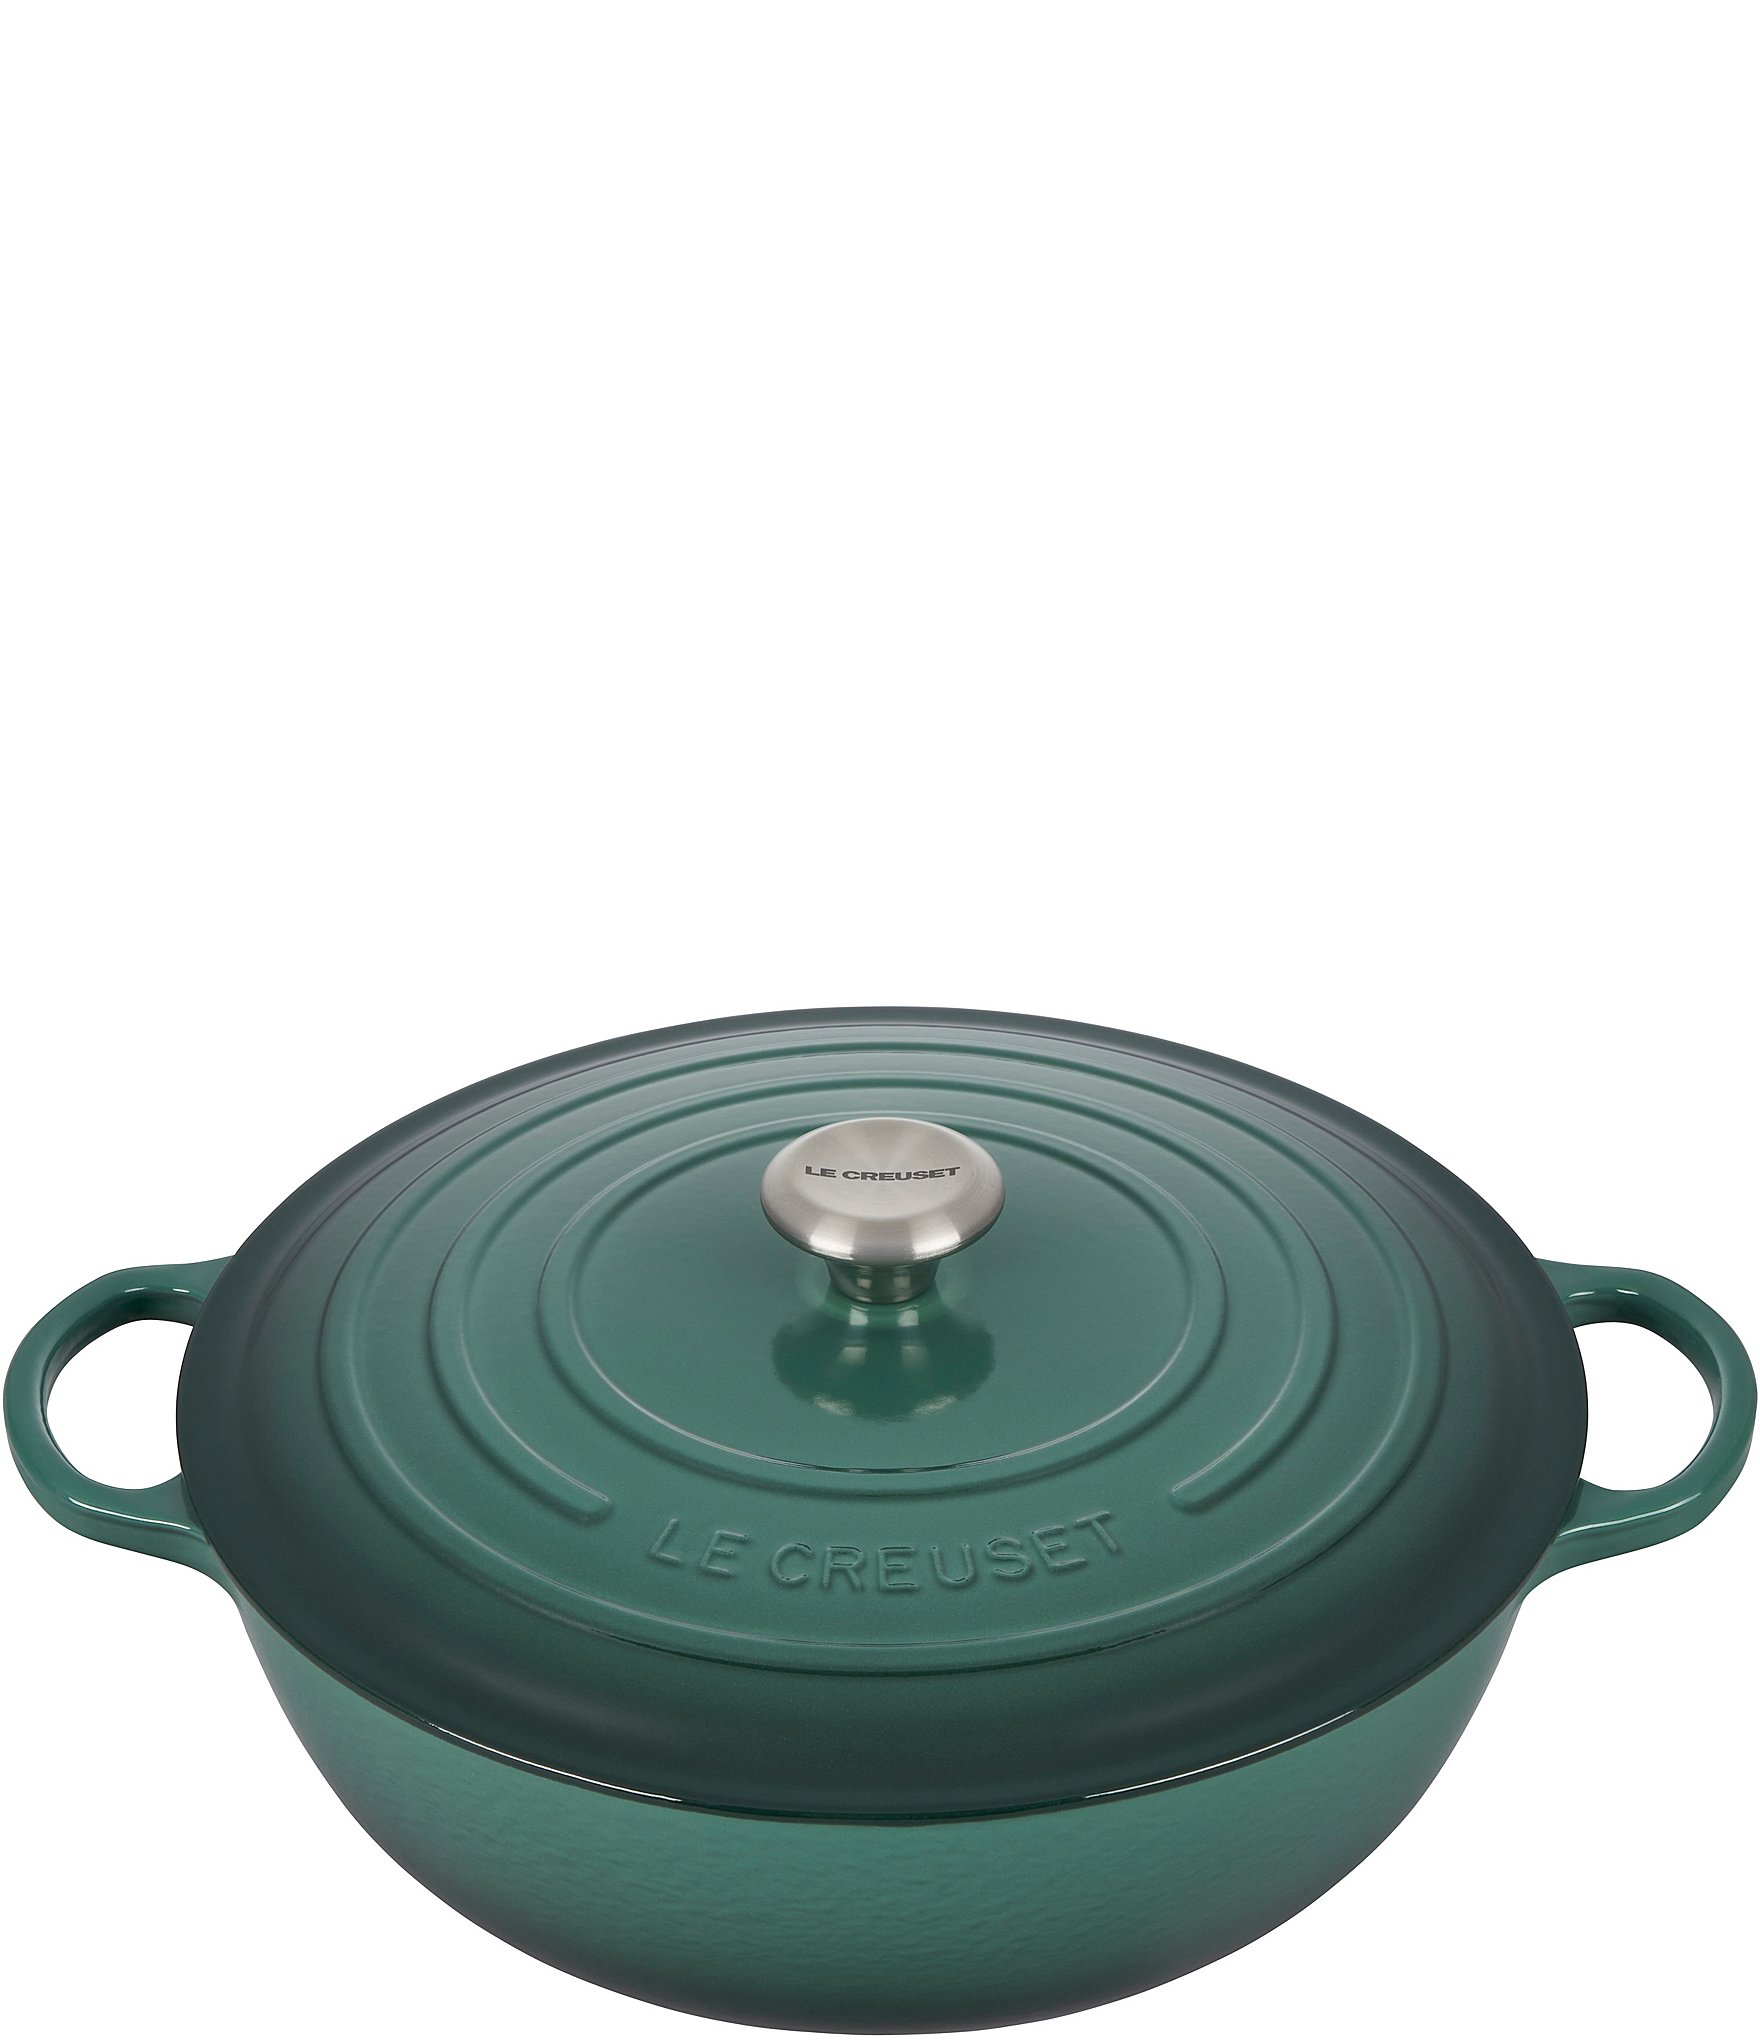 https://dimg.dillards.com/is/image/DillardsZoom/zoom/le-creuset-signature-enameled-cast-iron-chefs-oven-with-stainless-steel-knob-7.5-quart/00000000_zi_639f6e6b-eb89-4e80-9786-5765b293128a.jpg